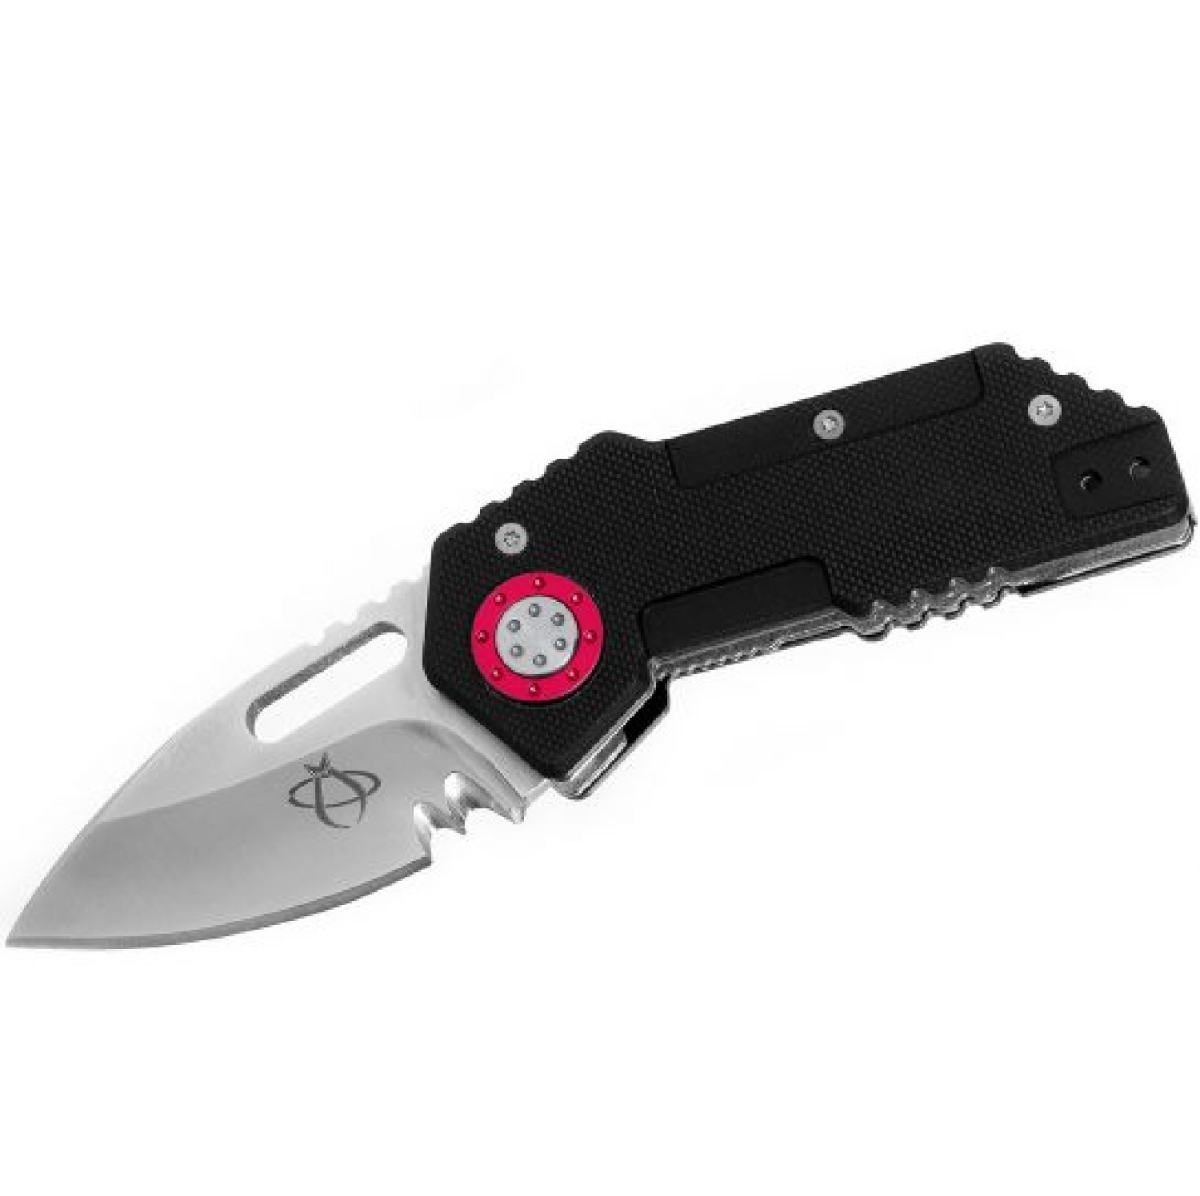 4019464 2.375 In. Tough Tony Folder Knife Blade With G10 Red Insert, Black